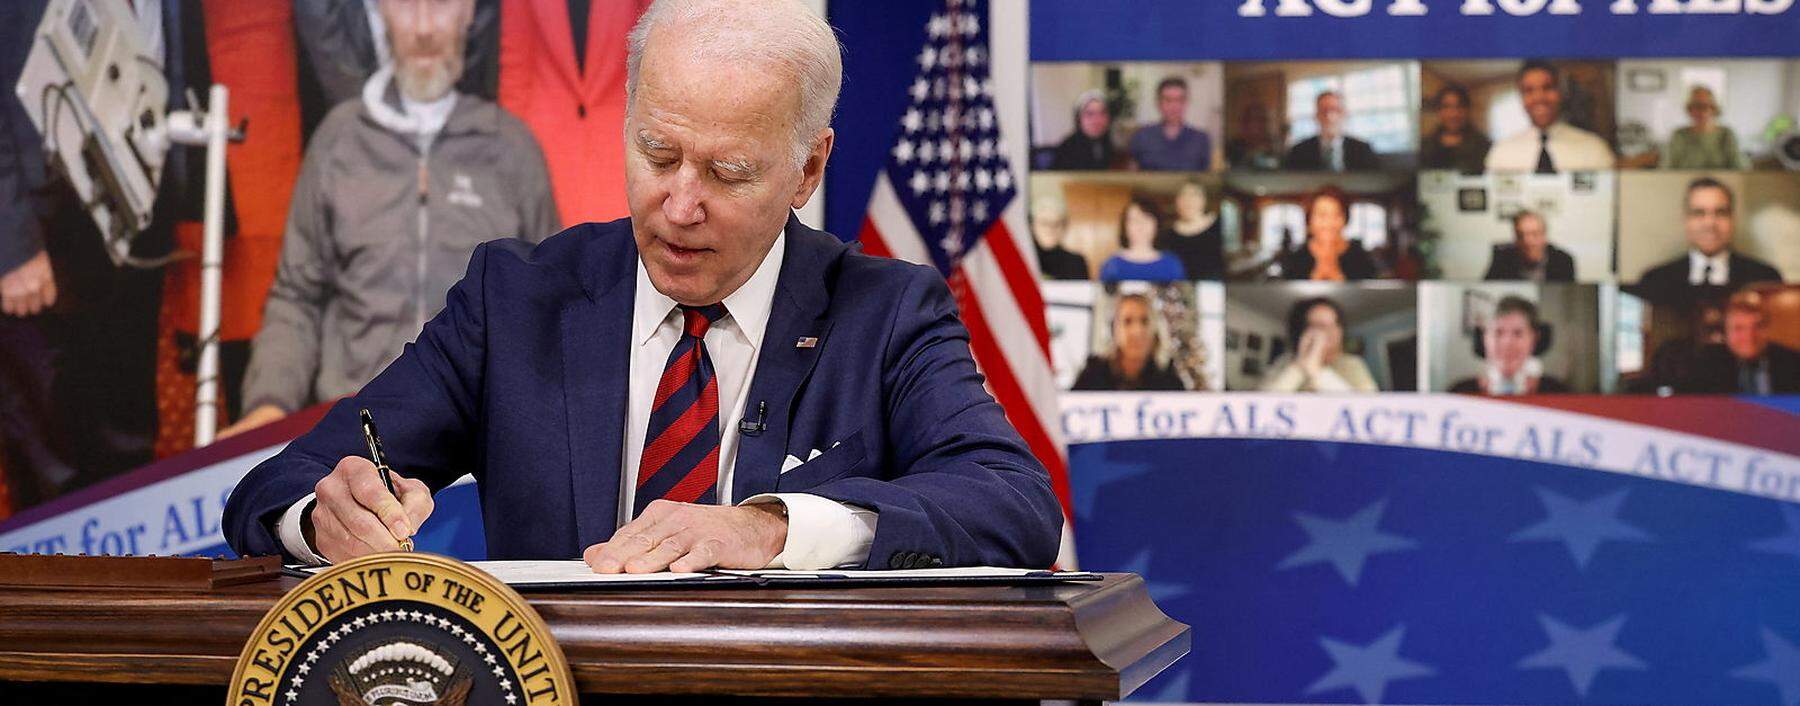 U.S. President Joe Biden signs the ACT for ALS Act at the White House in Washington